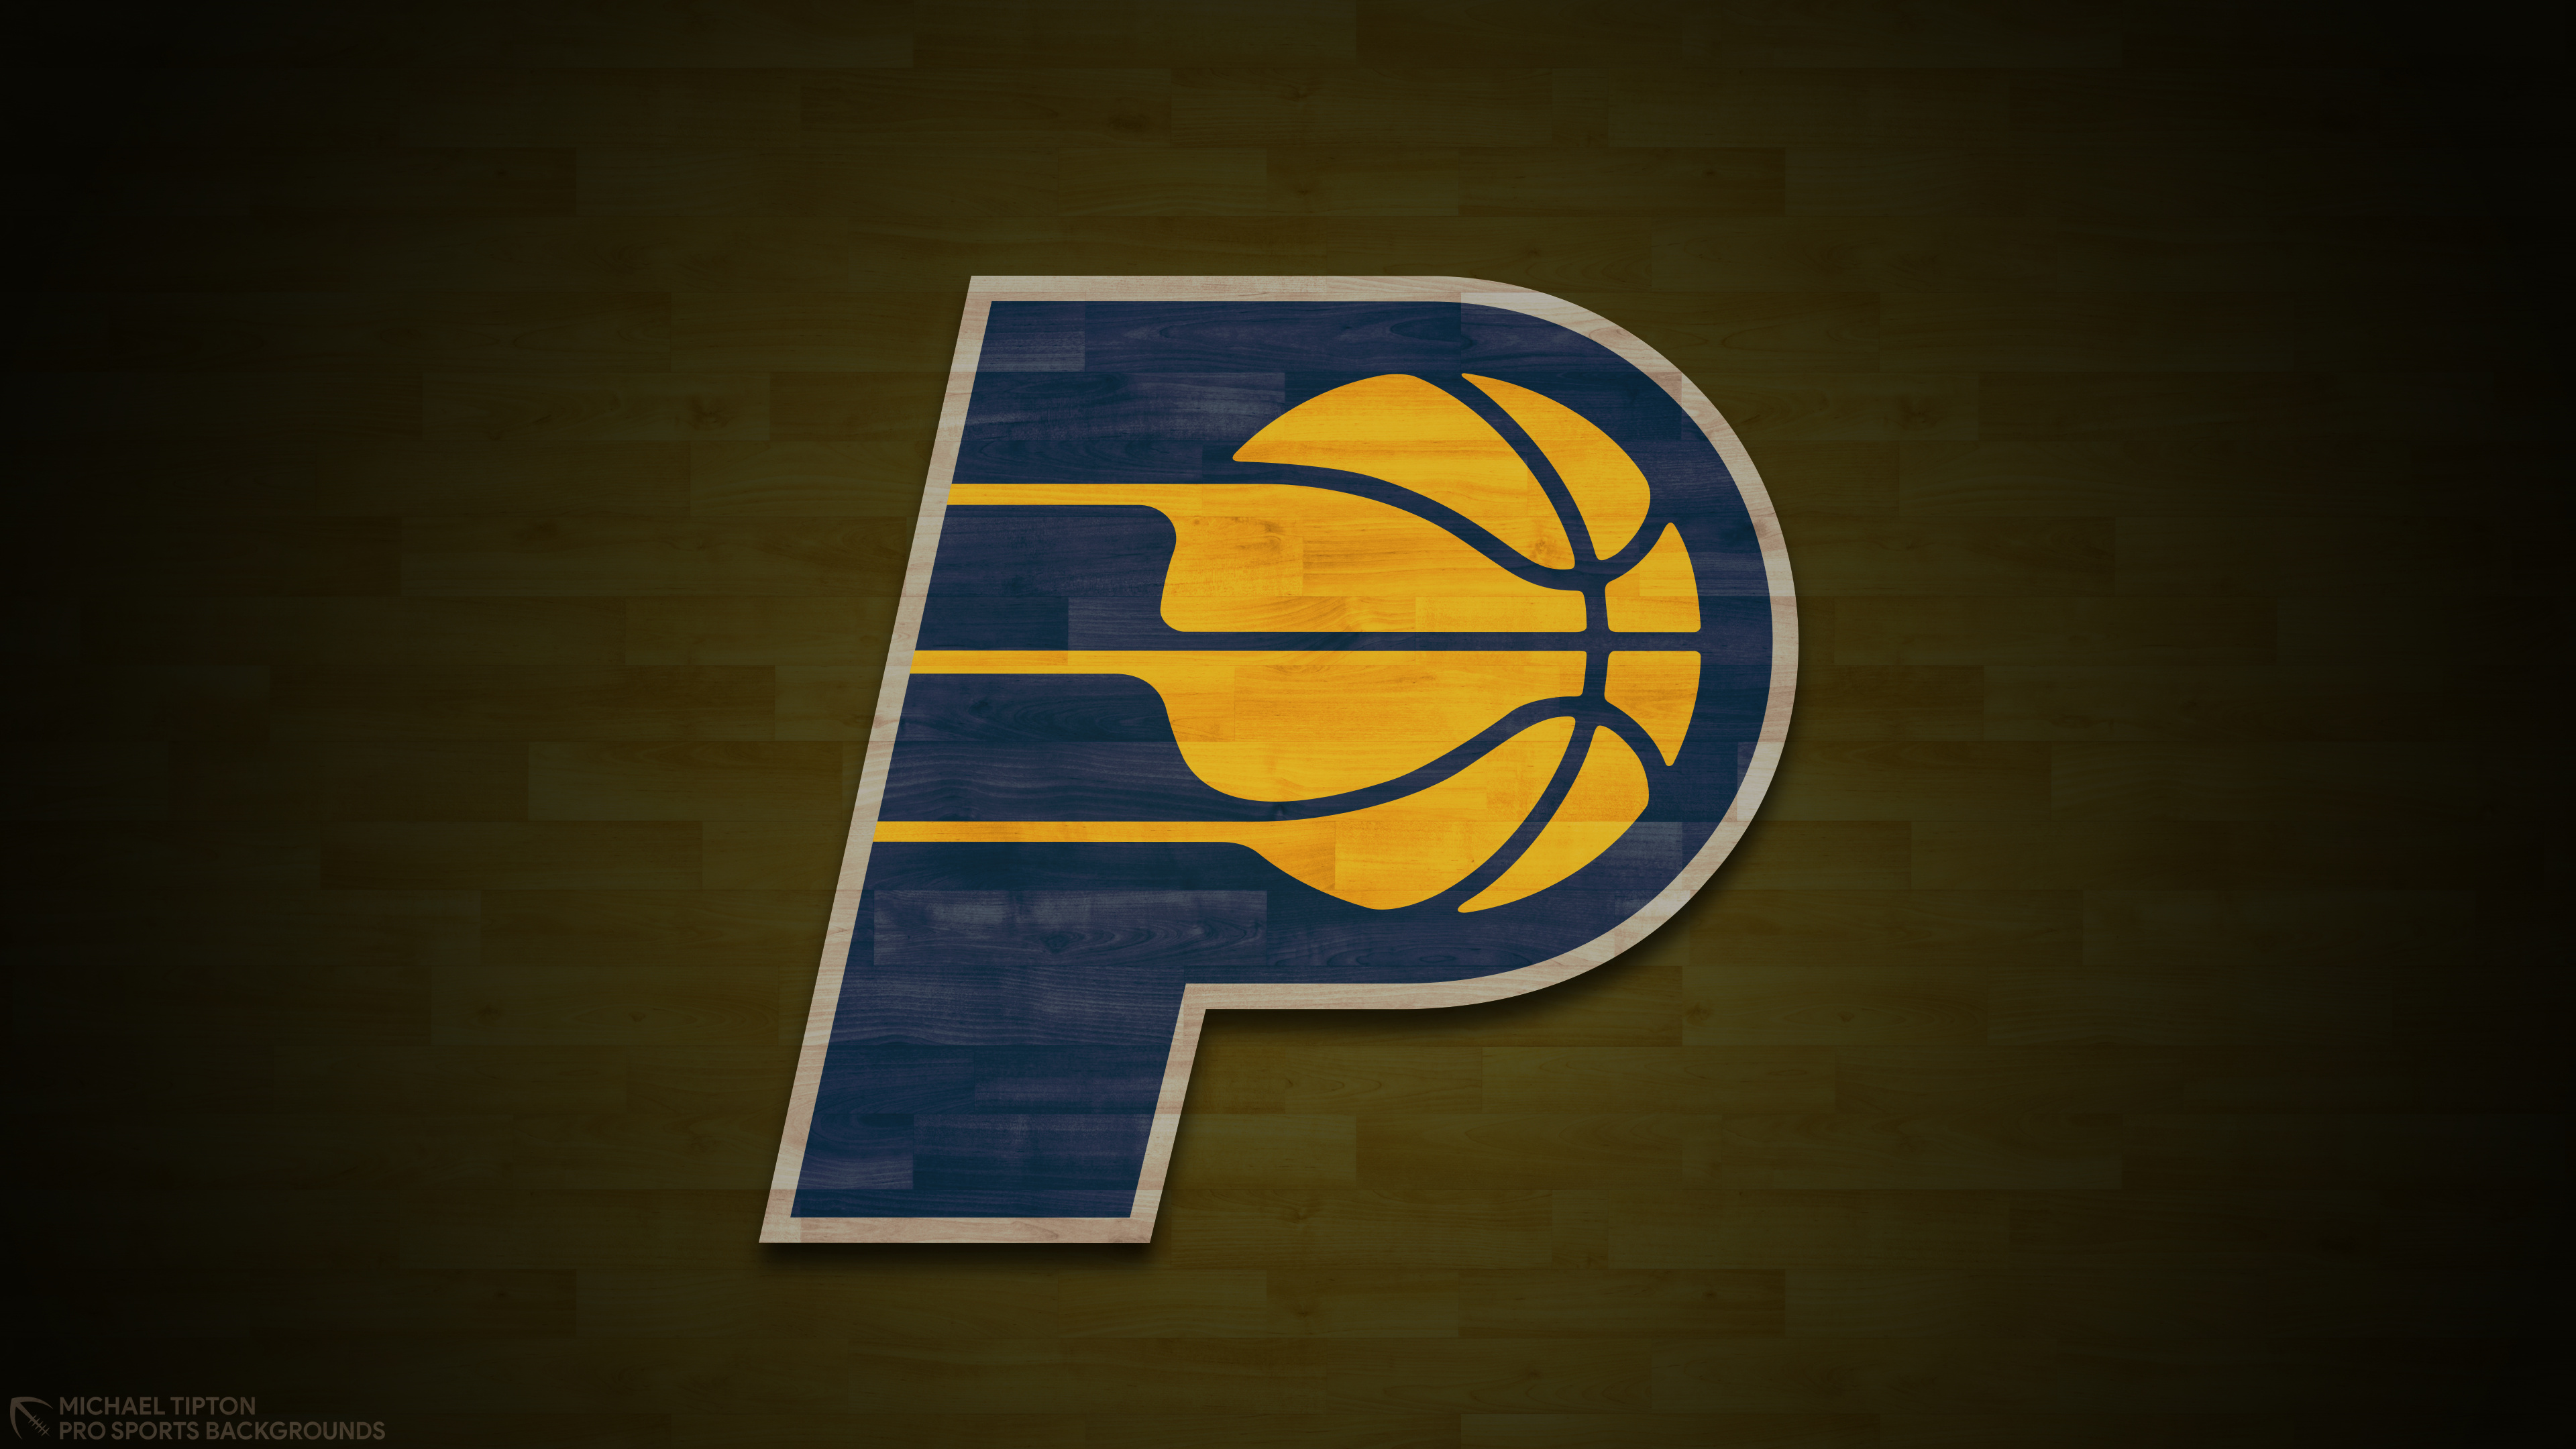 2022 Indiana Pacers, wallpapers, pro sports, backgrounds, 3840x2160 4K Desktop